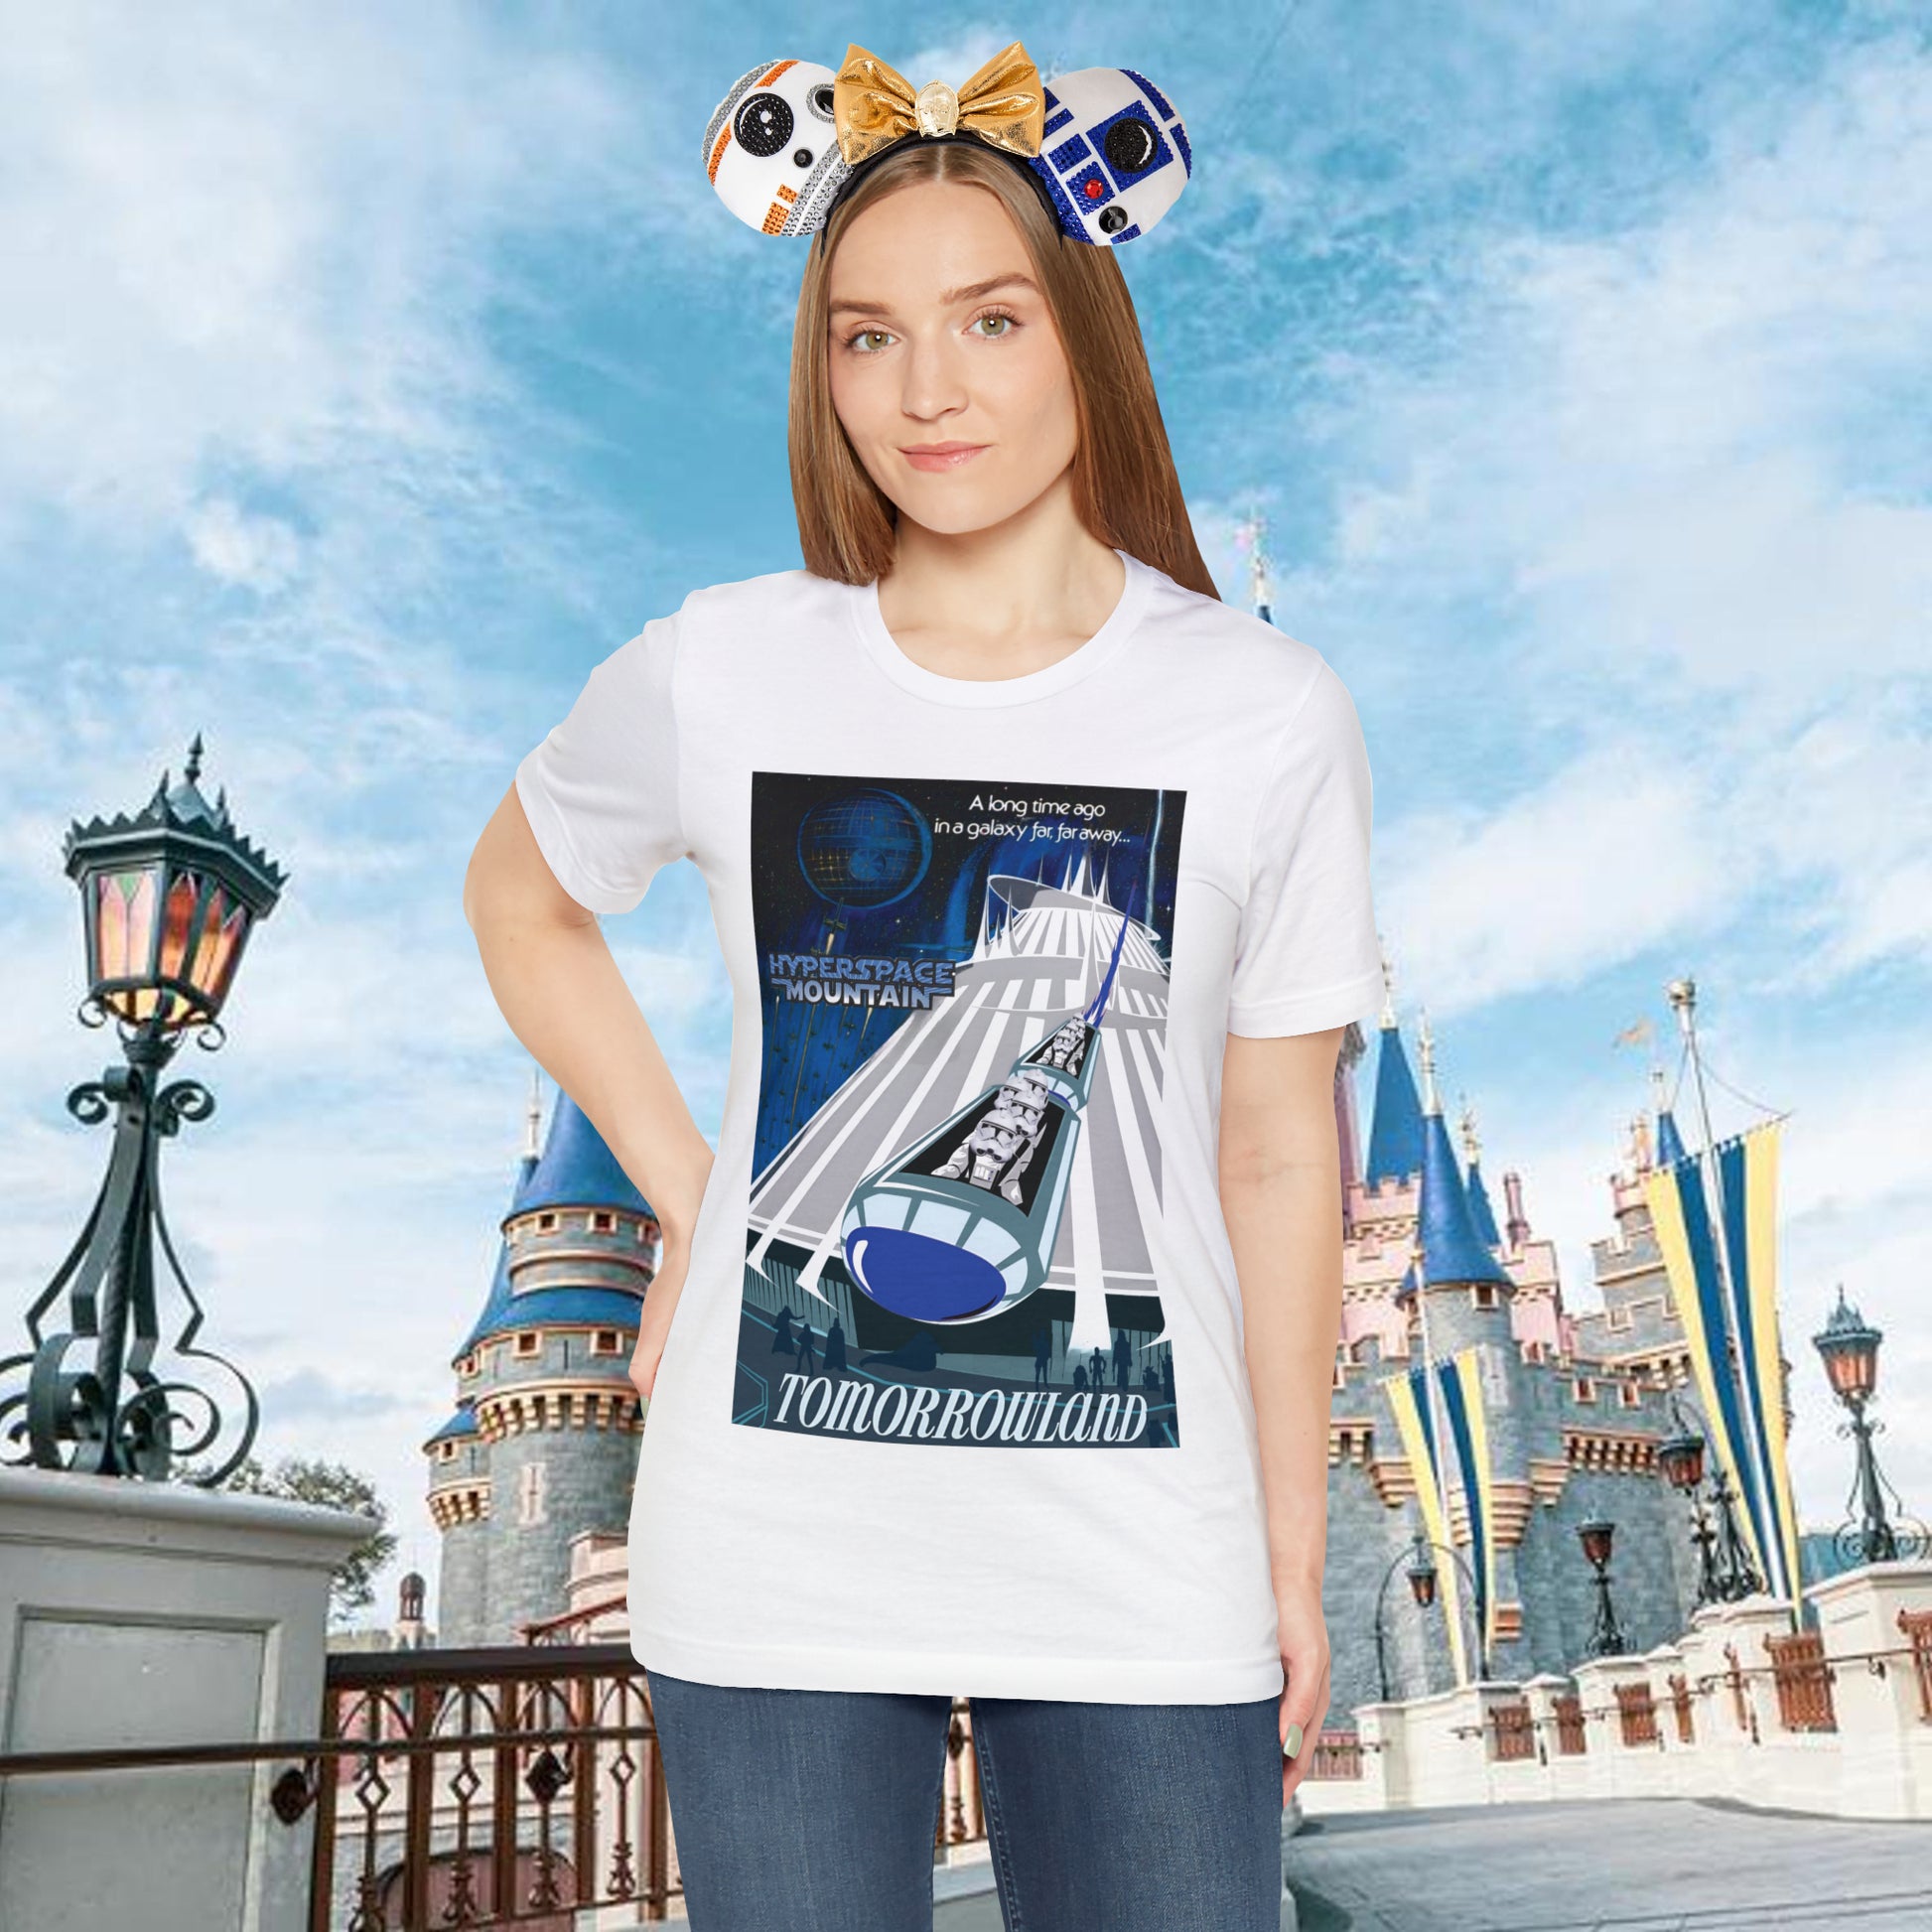 Hyperspace Mountain t shirt